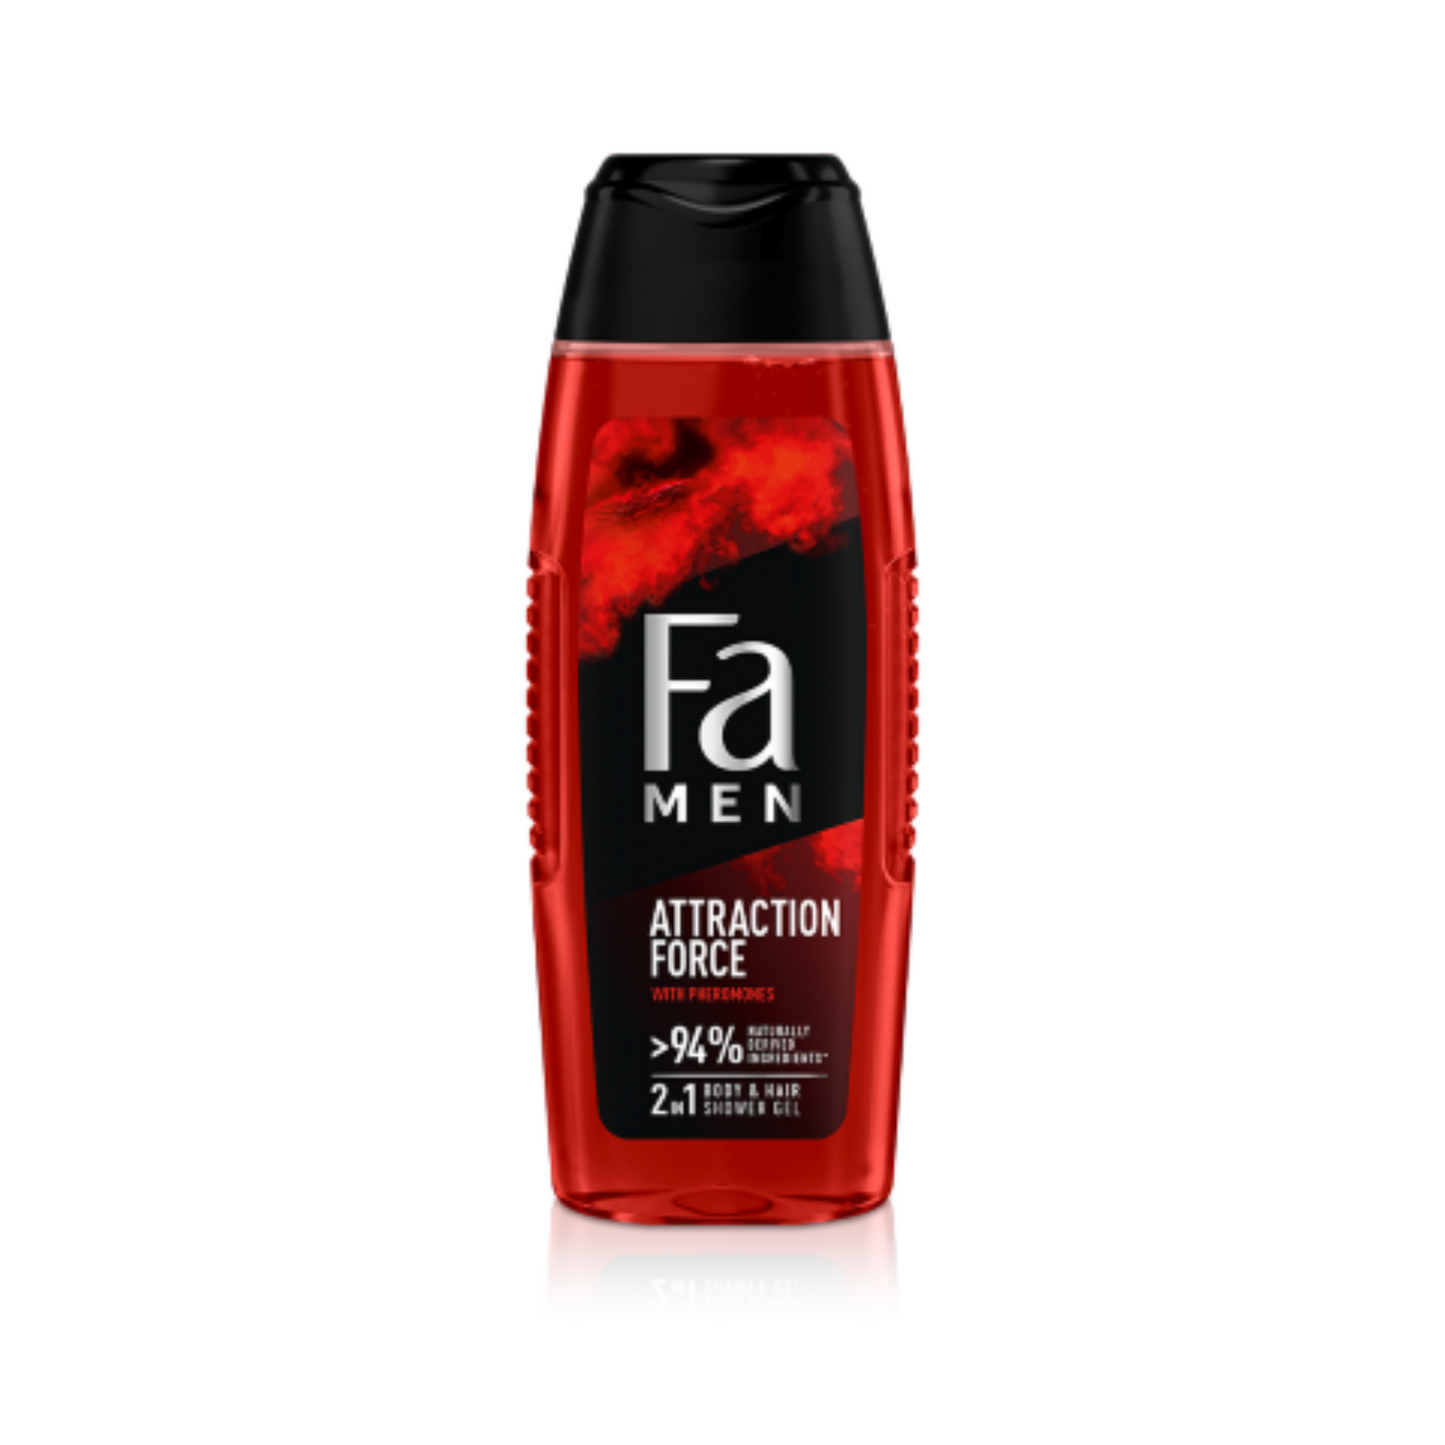 Primary image of Attraction Force Men's Shower Gel